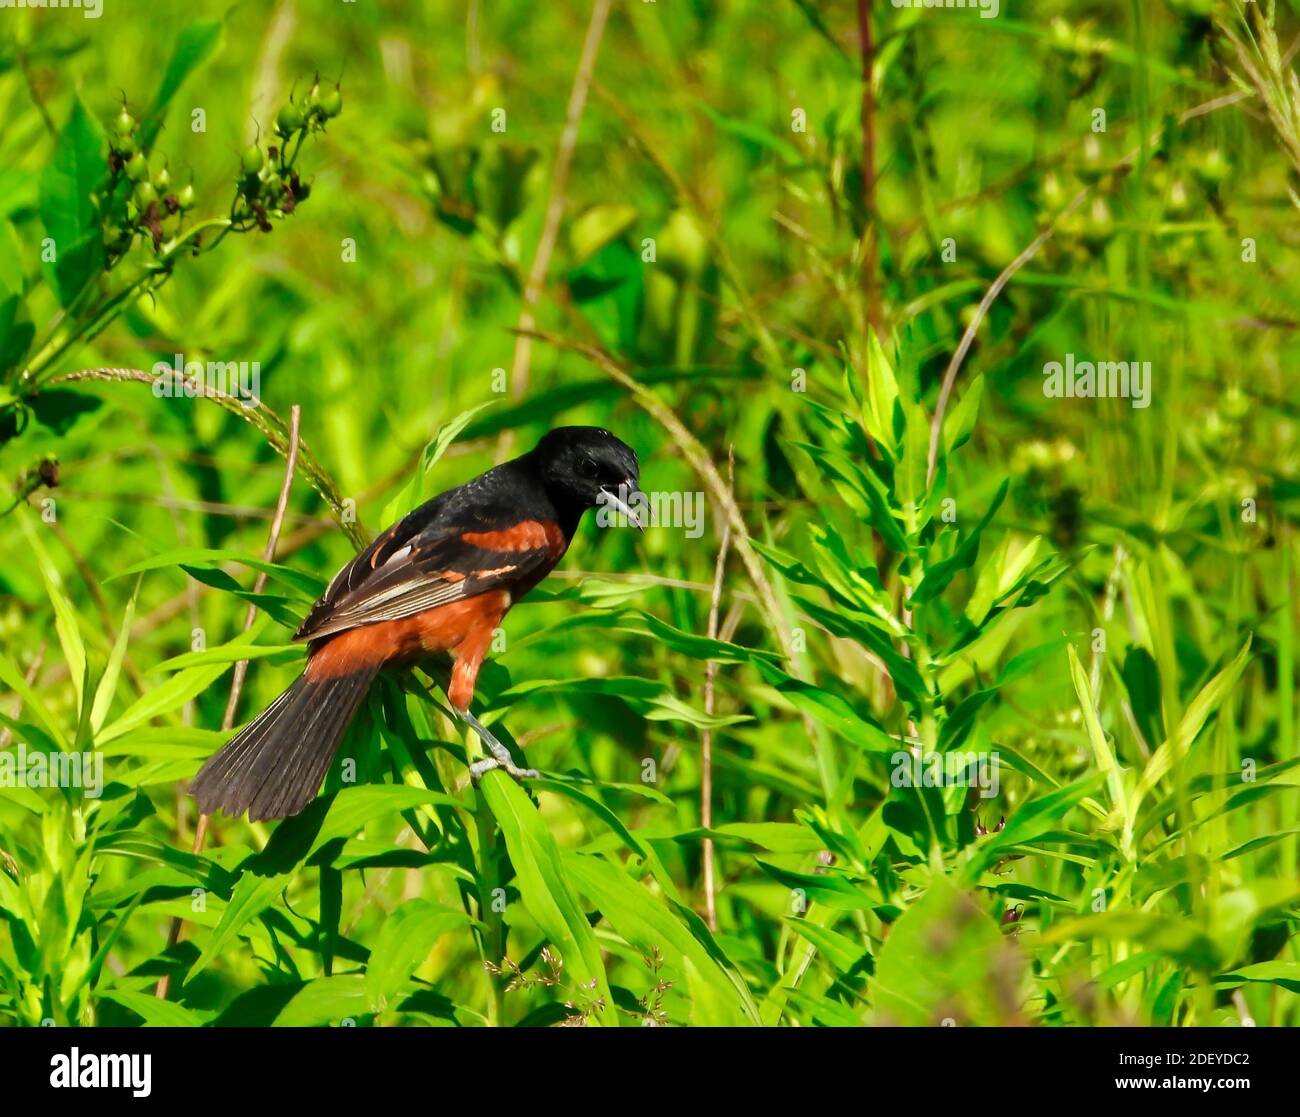 Orchard Oriole Bird Perched in Beautiful Black and Chestnut Red Feather Perched Among Green Foliage with Beak Wide Open Stock Photo